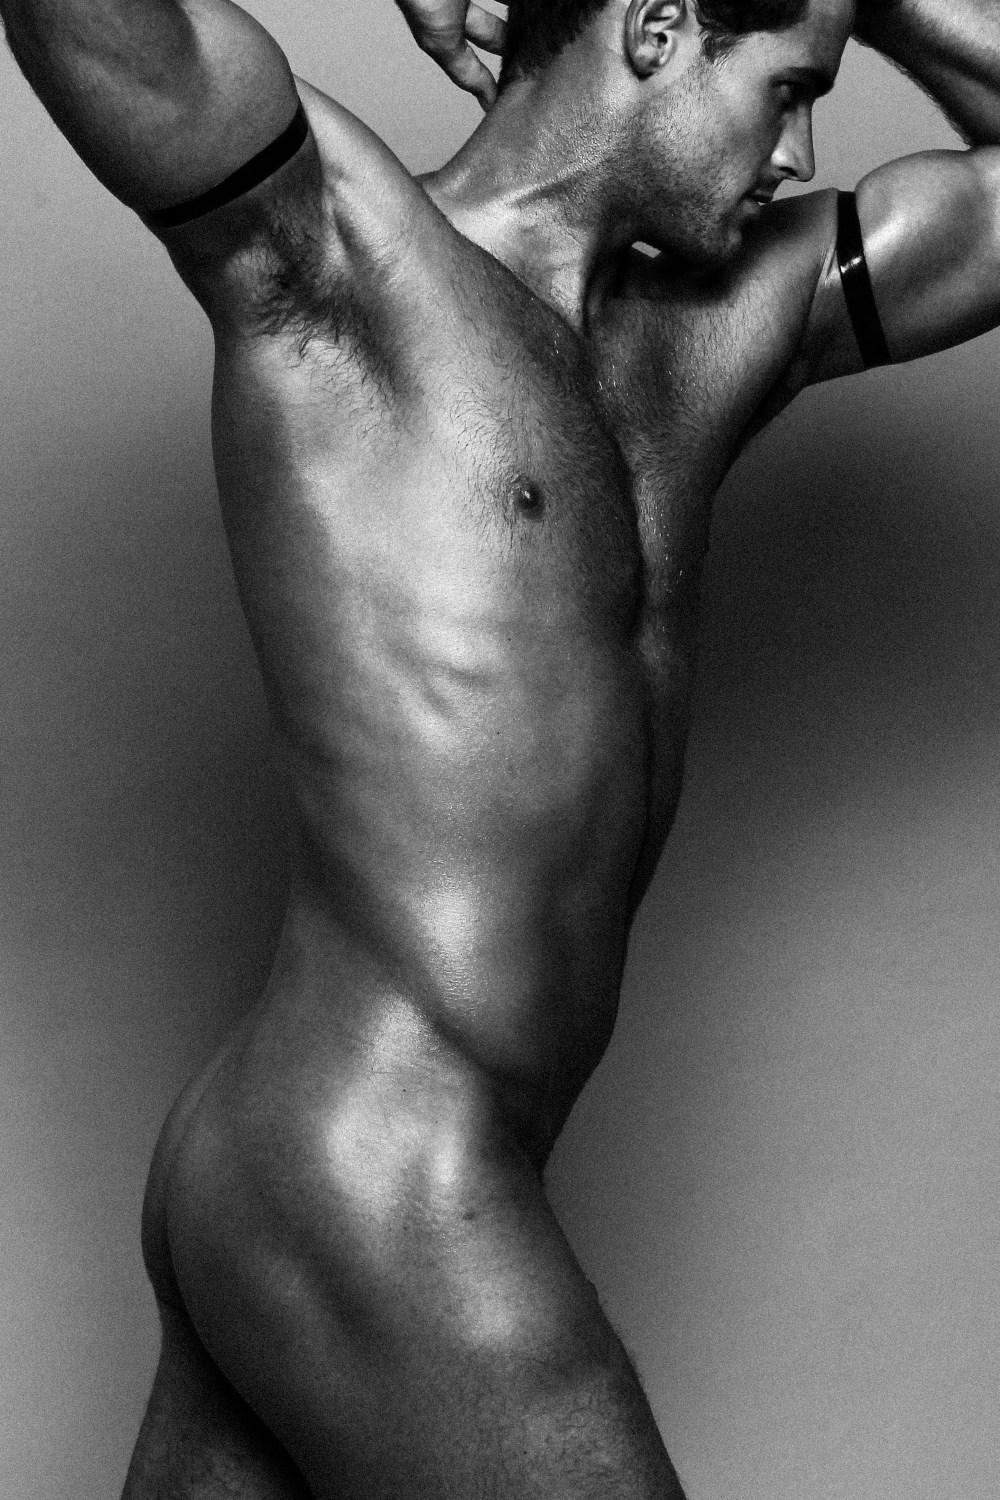 Lance Parker naked by Jared Bautista.